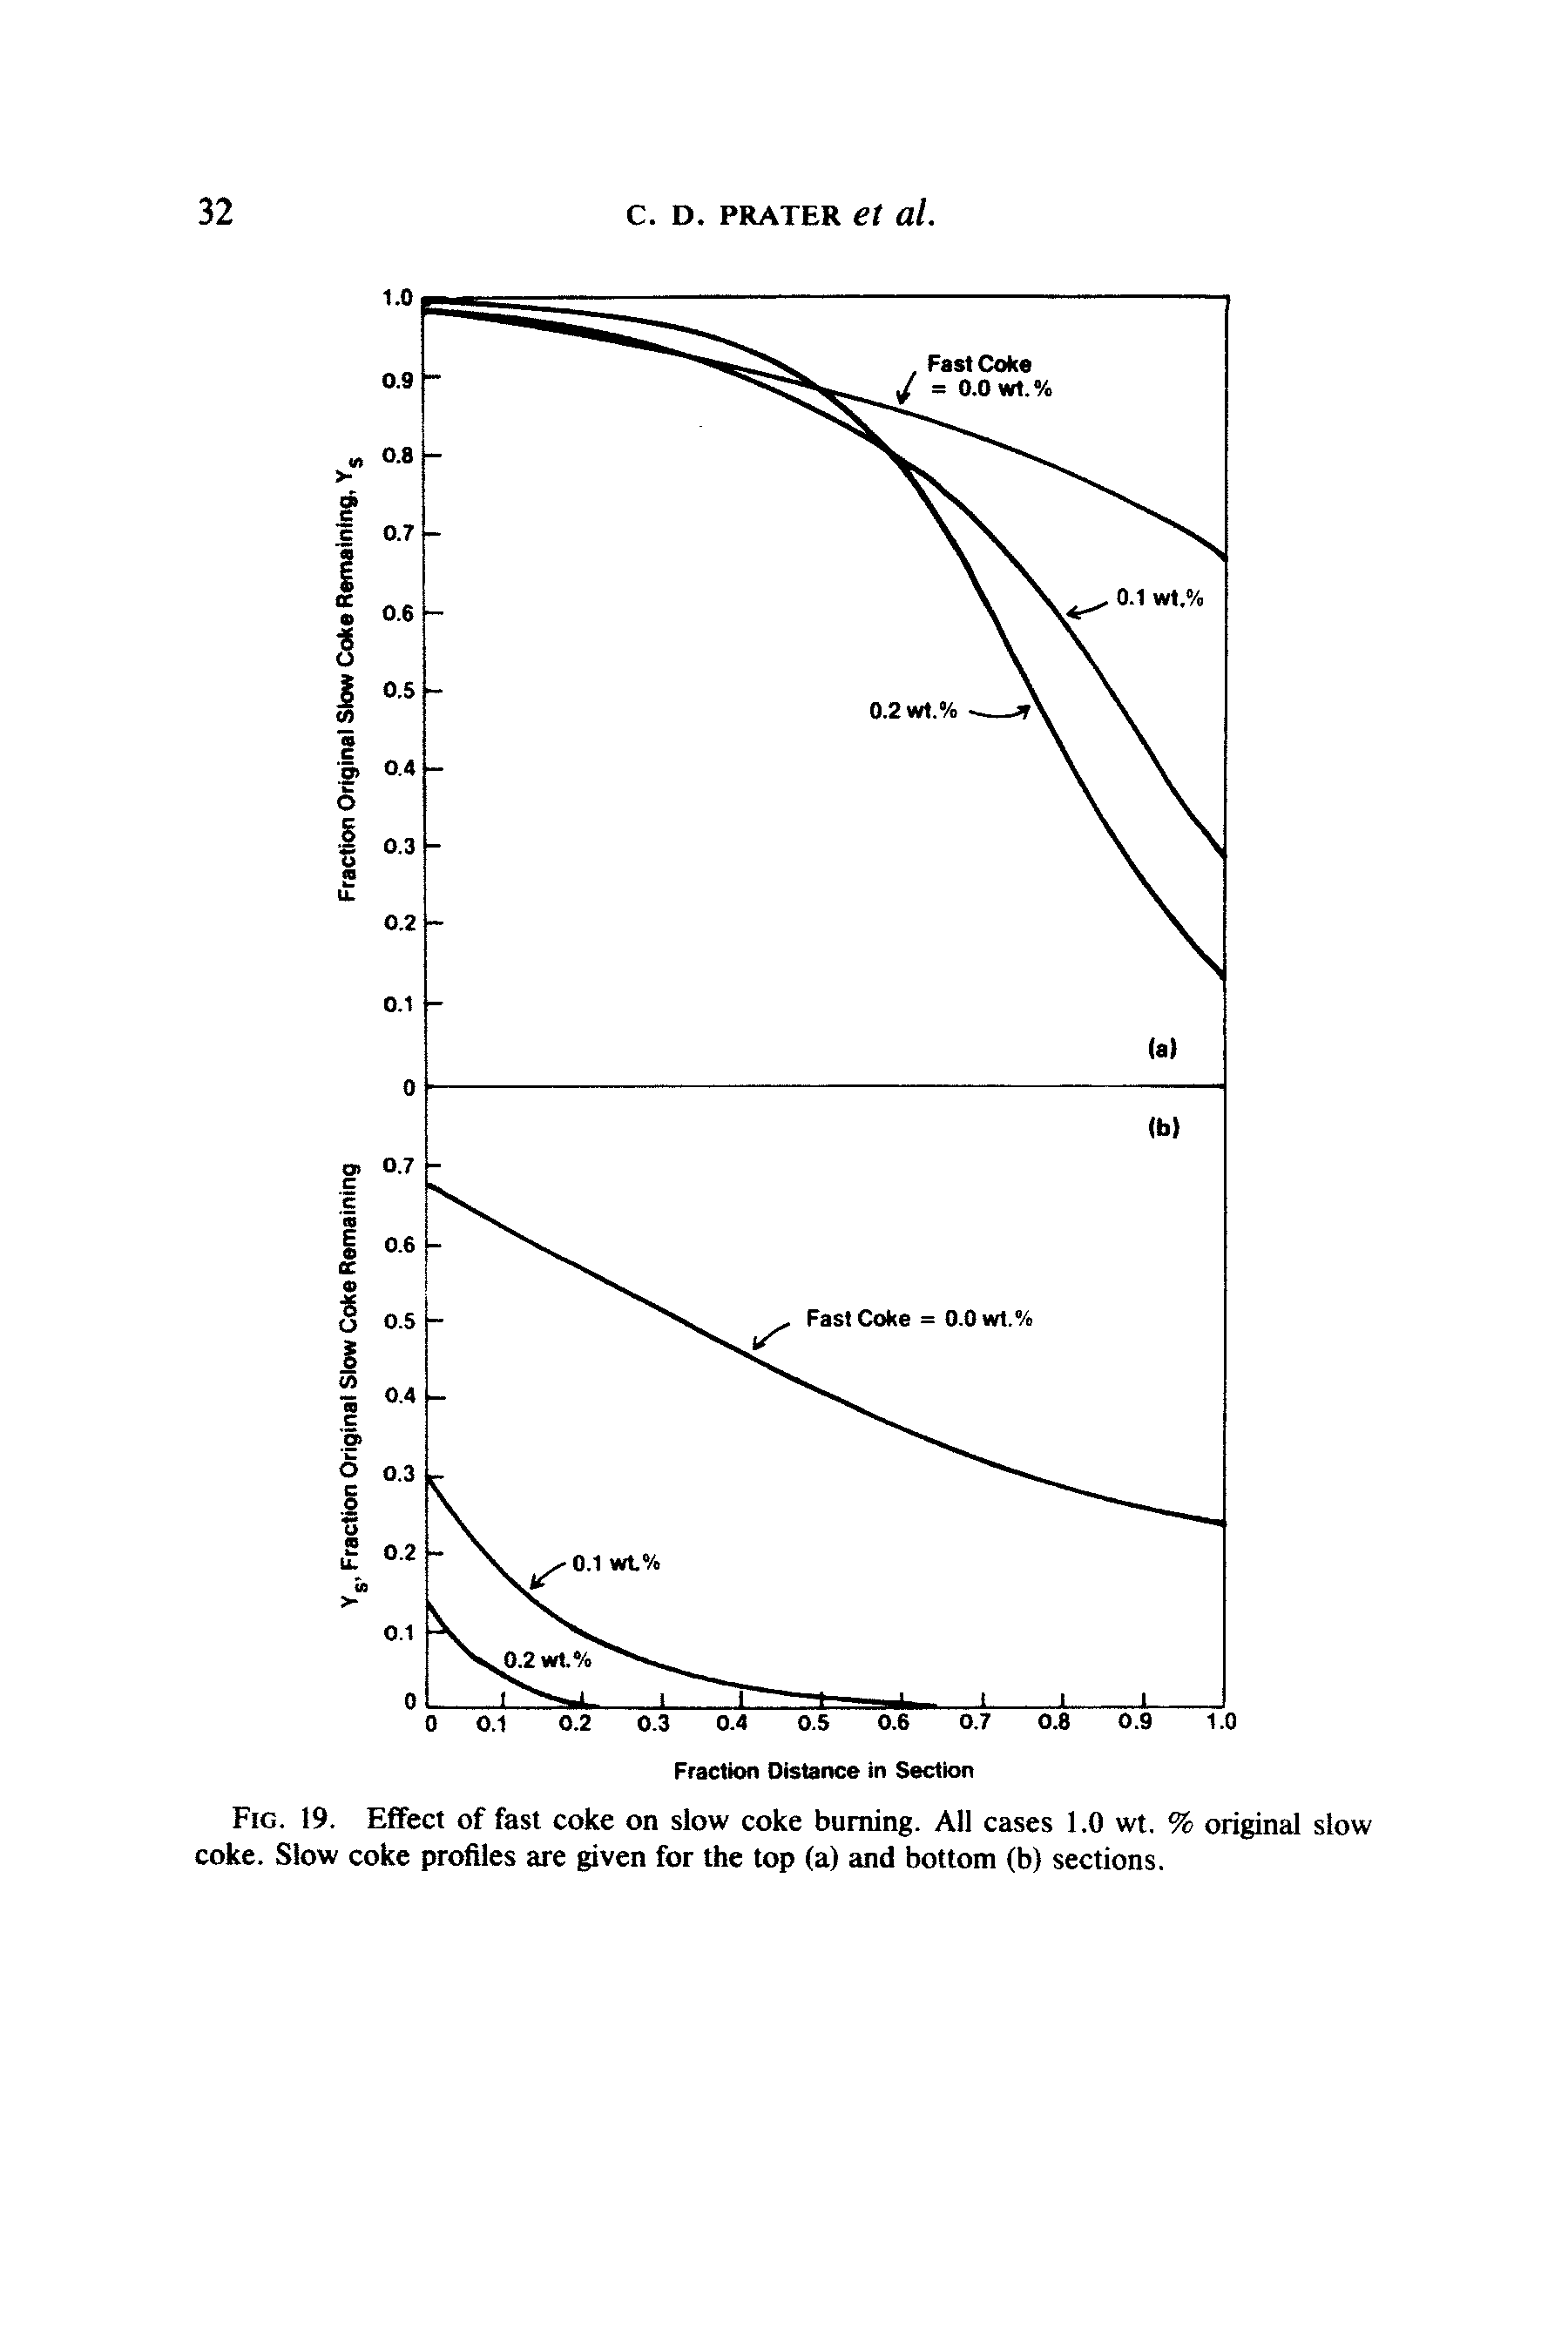 Fig. 19. Effect of fast coke on slow coke burning. All cases 1.0 wt. % original slow coke. Slow coke profiles are given for the top (a) and bottom (b) sections.